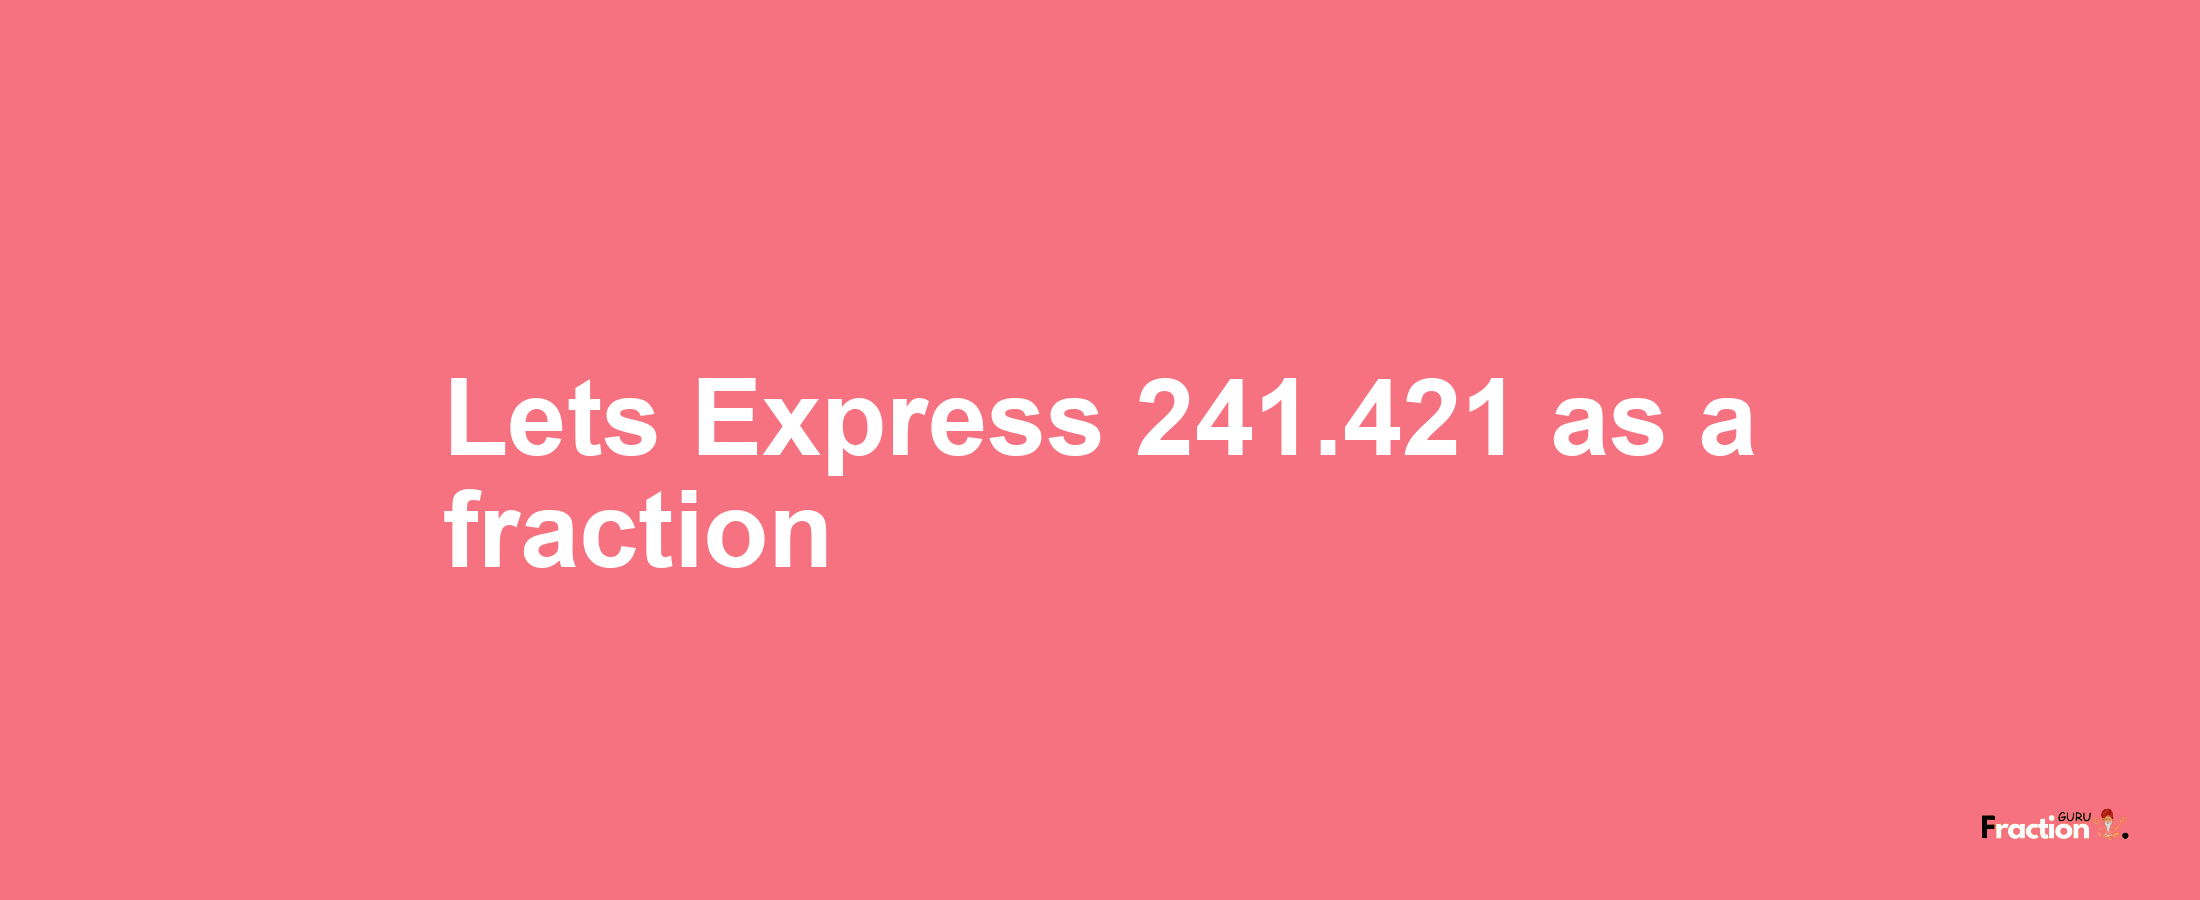 Lets Express 241.421 as afraction